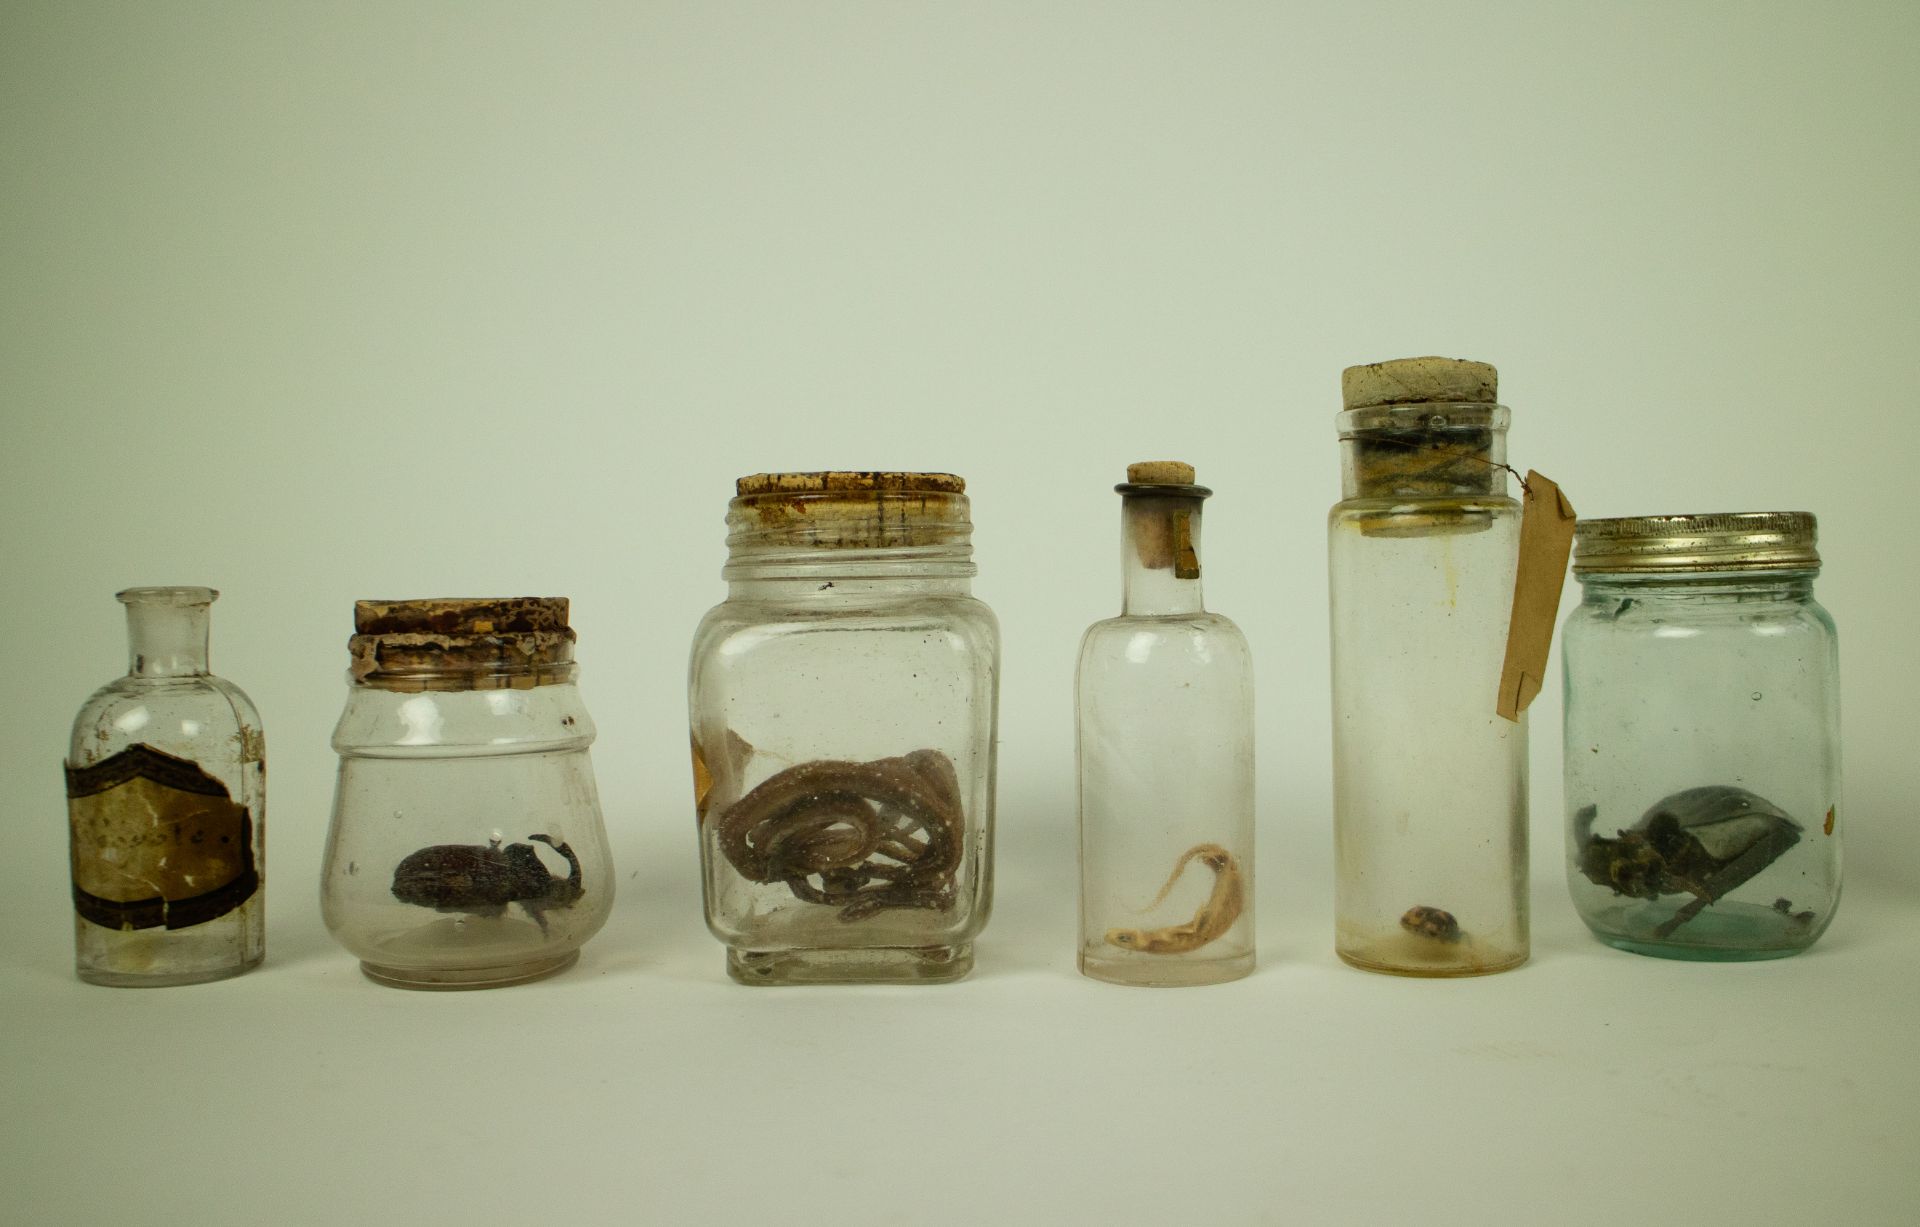 Collection with animals and animal dolls in glass jars - Image 3 of 3